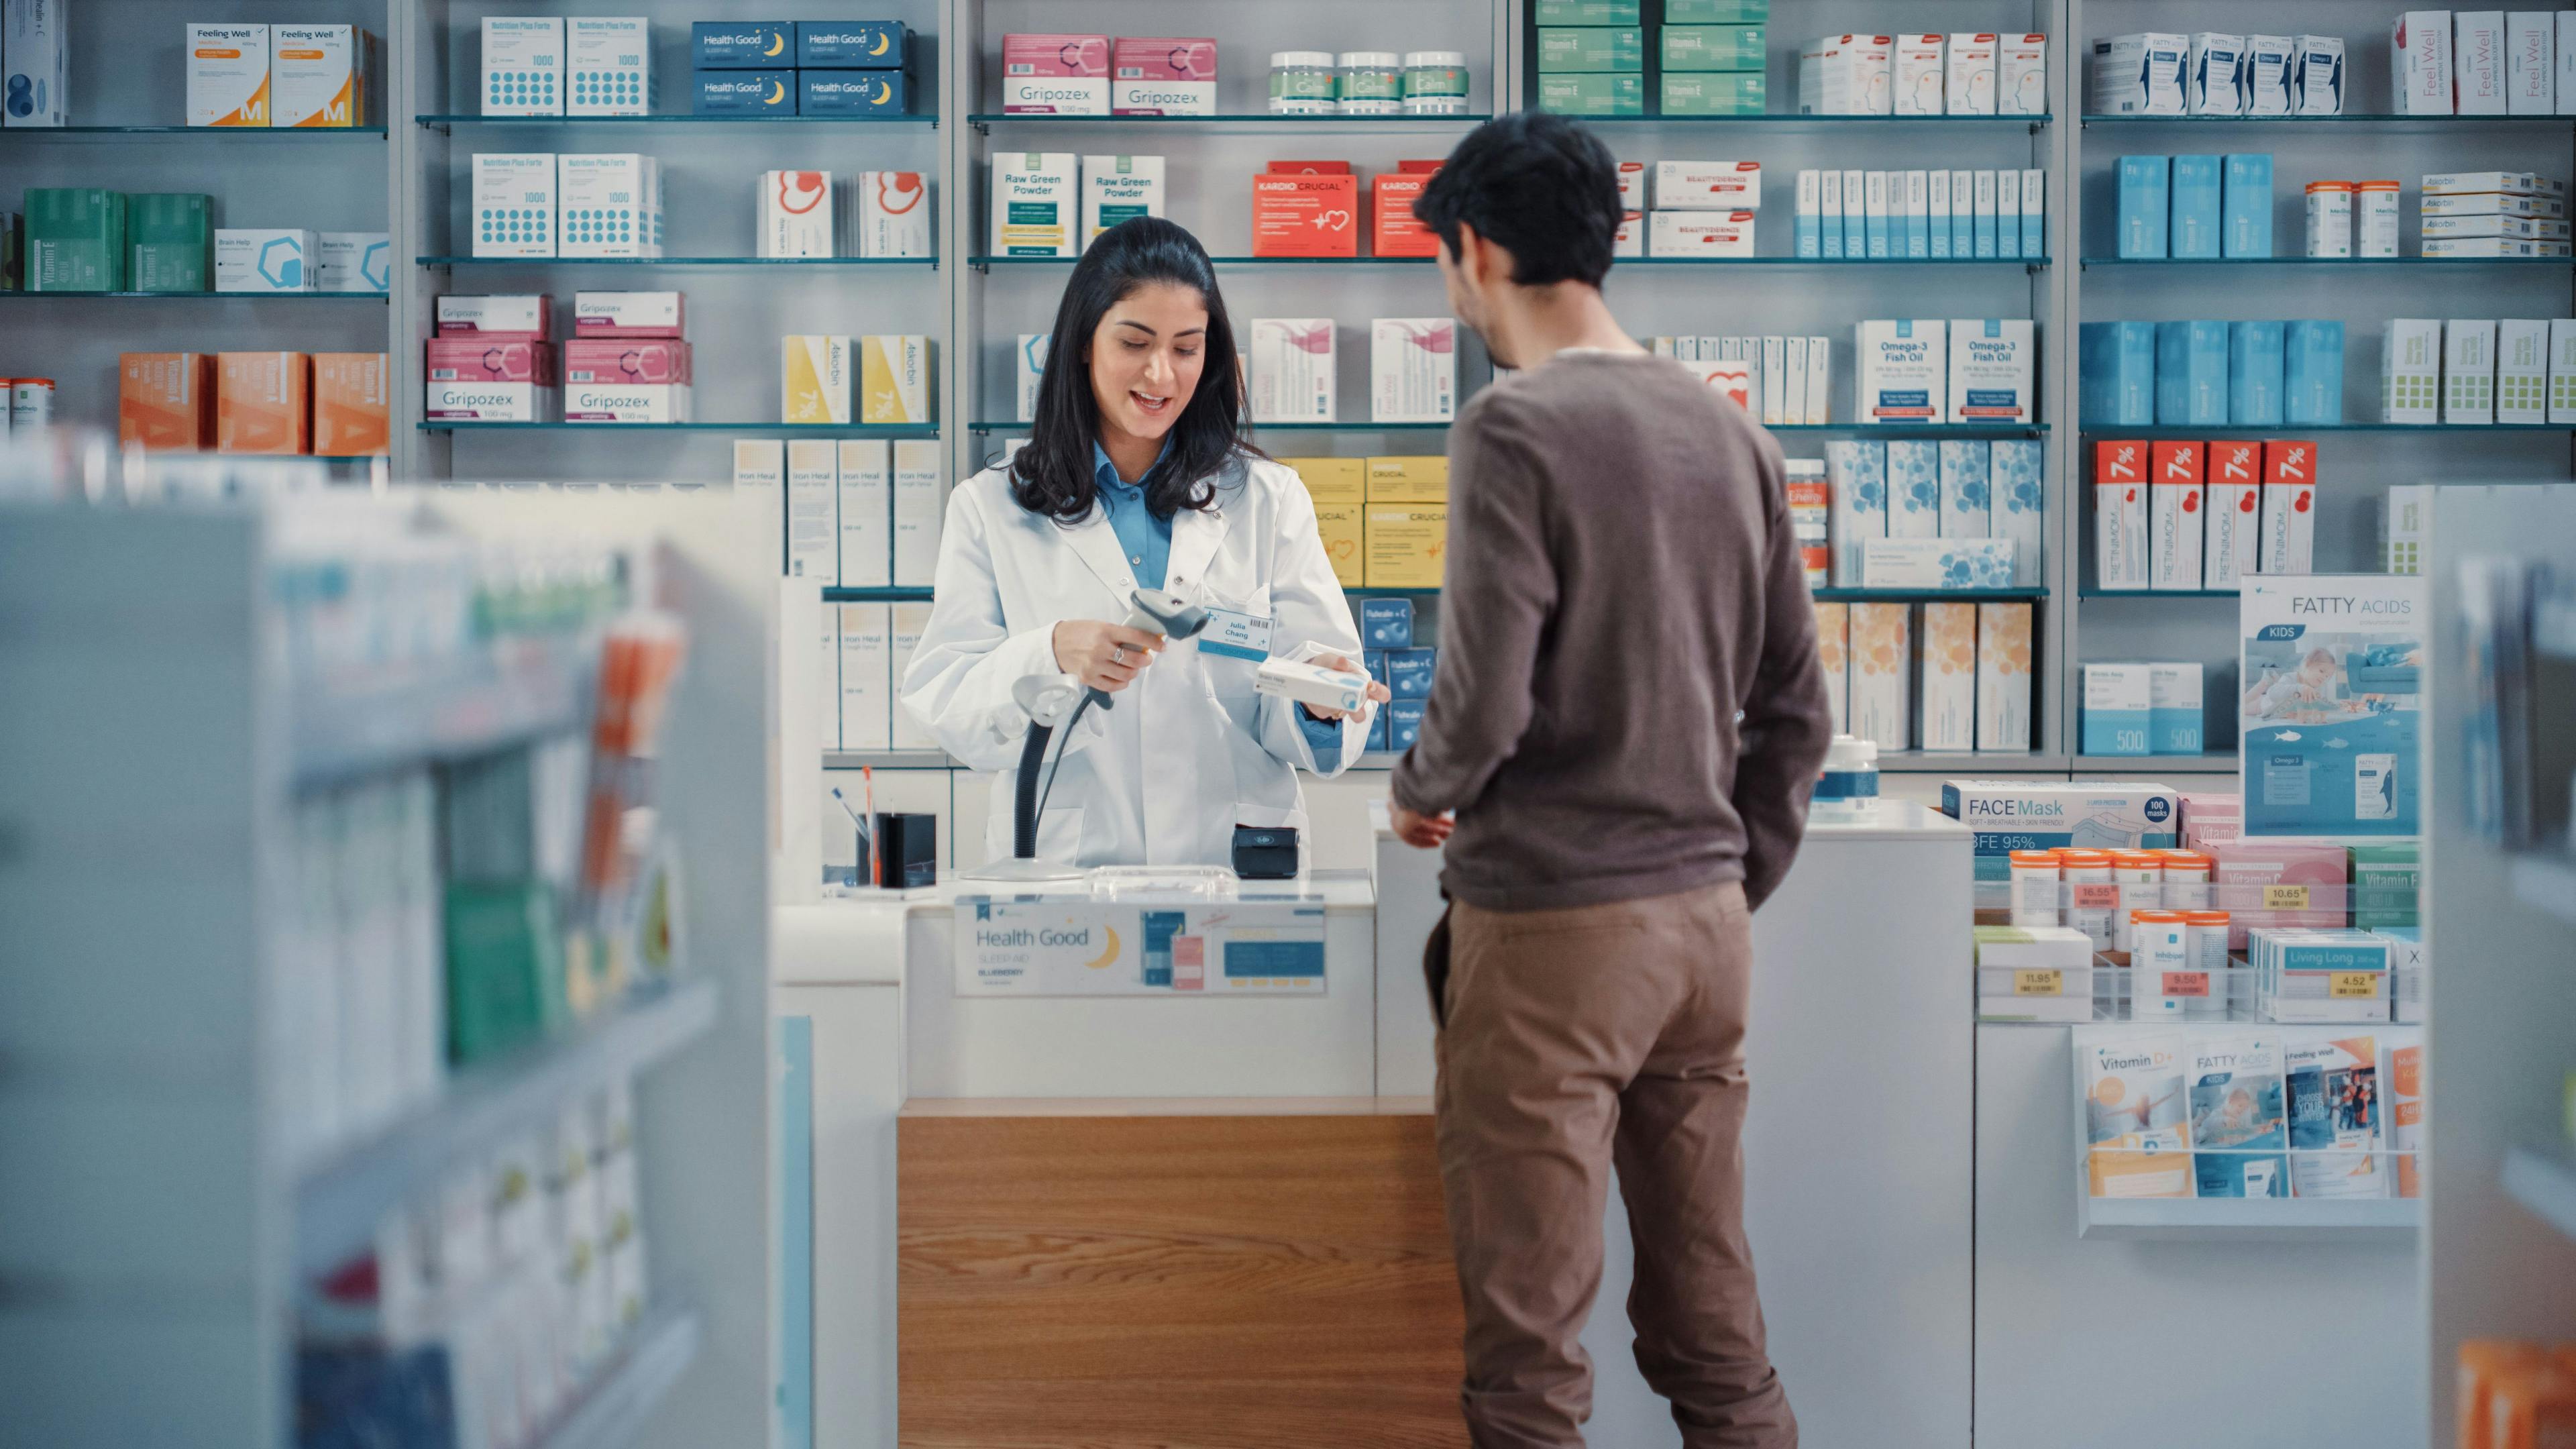 Pharmacy Drugstore Checkout Cashier Counter: Beautiful Female Pharmacist Scans Barcode and Handsome Young Man Talks to a Cashier and Pays for the Health Care Products at the Checkout Counter - Image credit: Gorodenkoff | stock.adobe.com